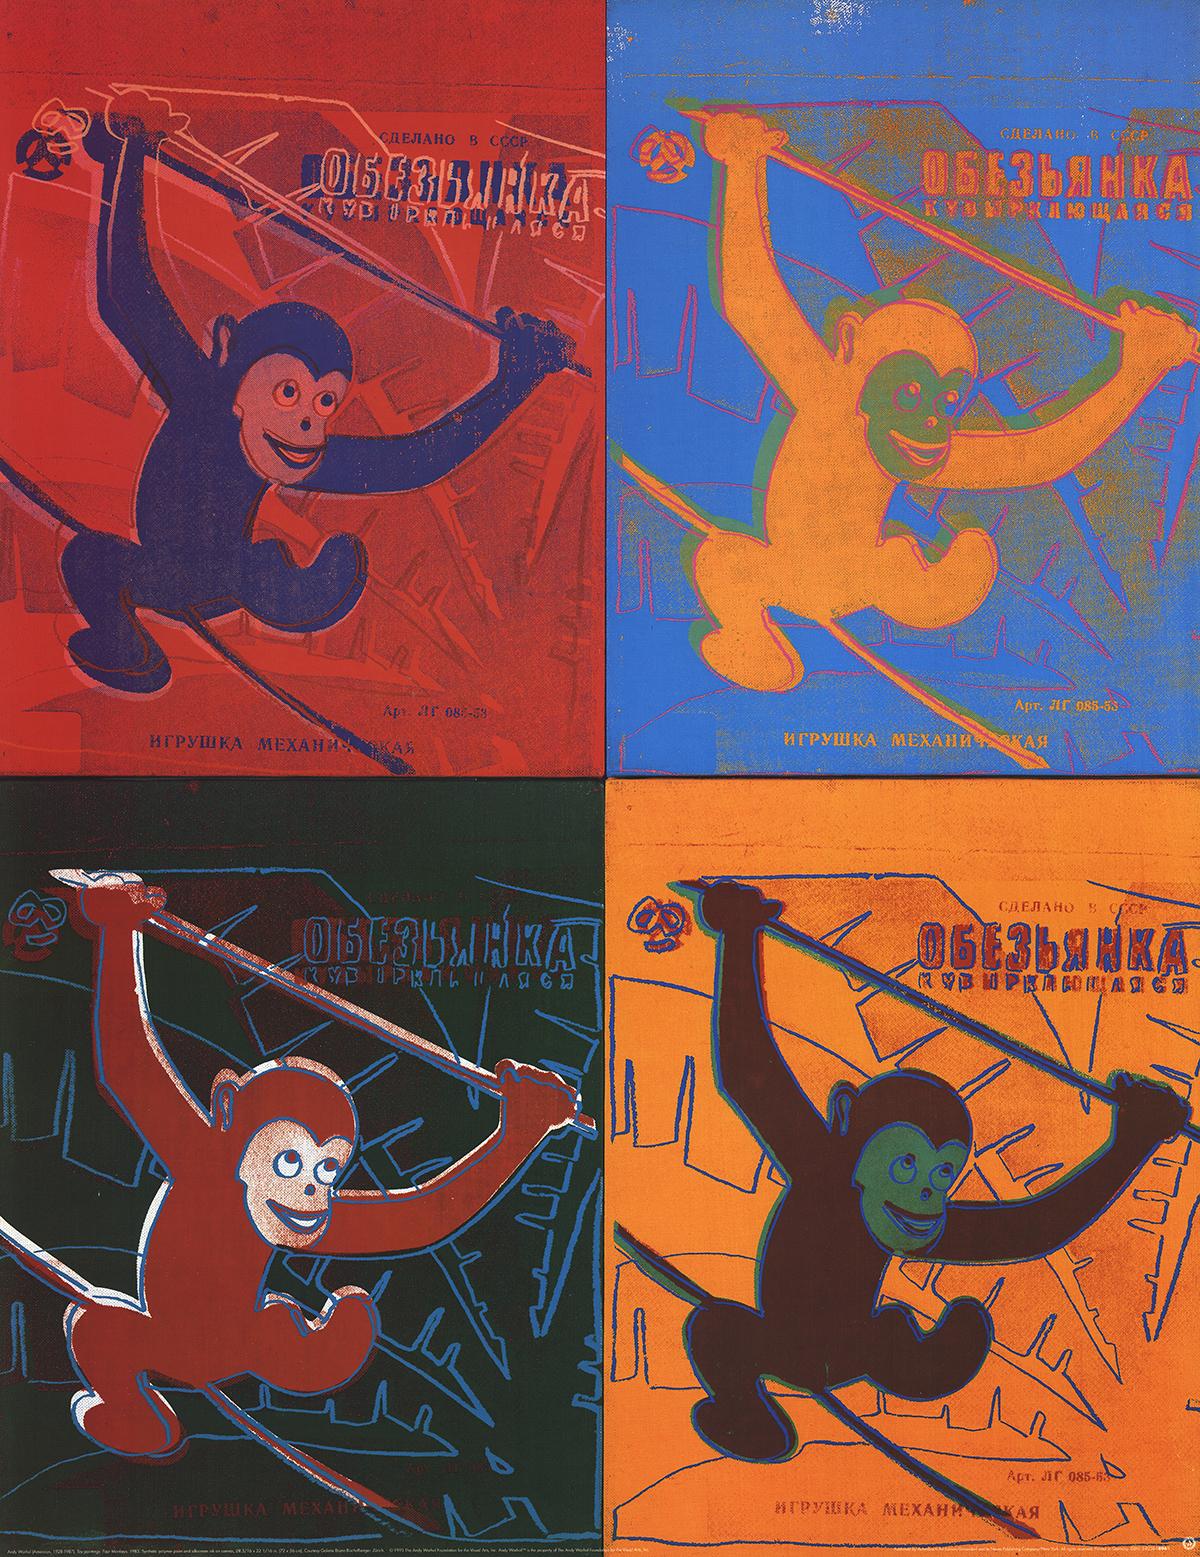 Very large reproduction of Warhol's Multiple Four Monkeys published and printed in 1990 by Te neues Publishing in Germany. First edition.
